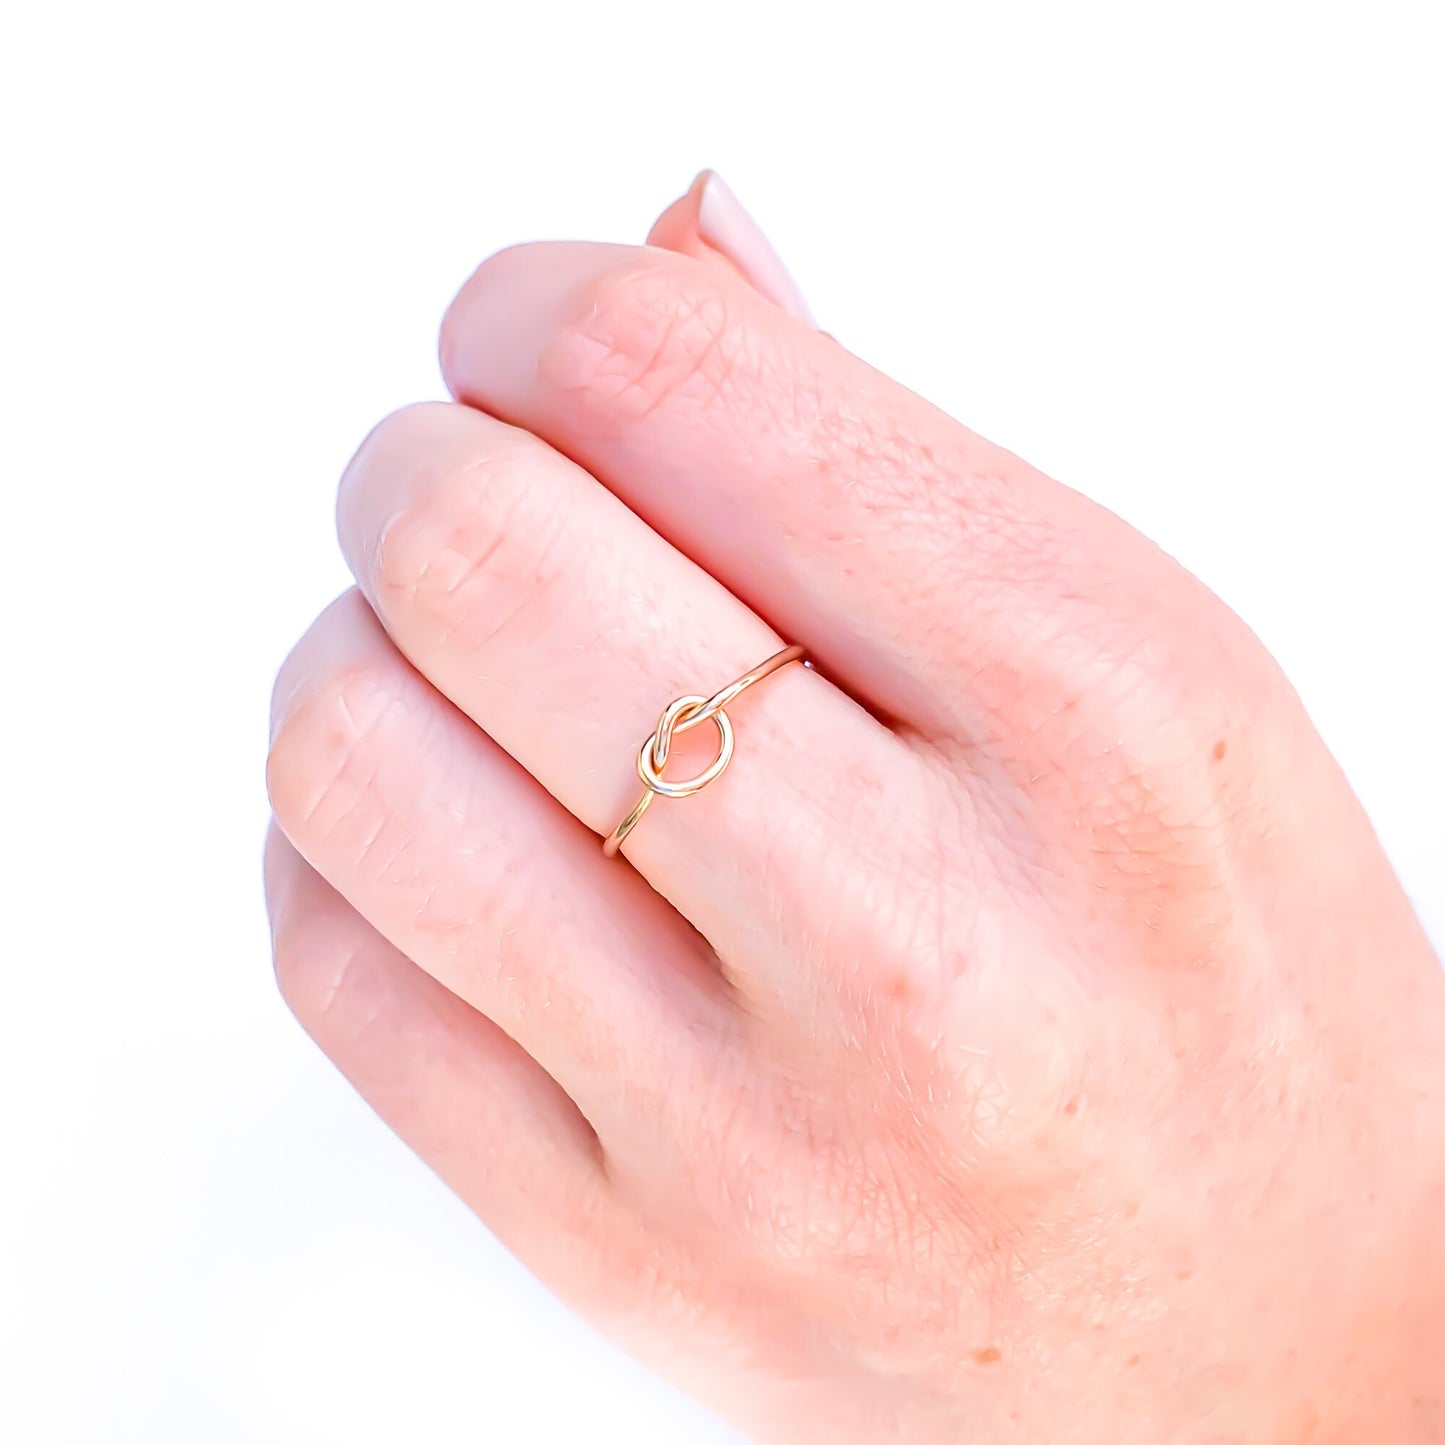 Gold Knot Ring, 14K Gold Filled